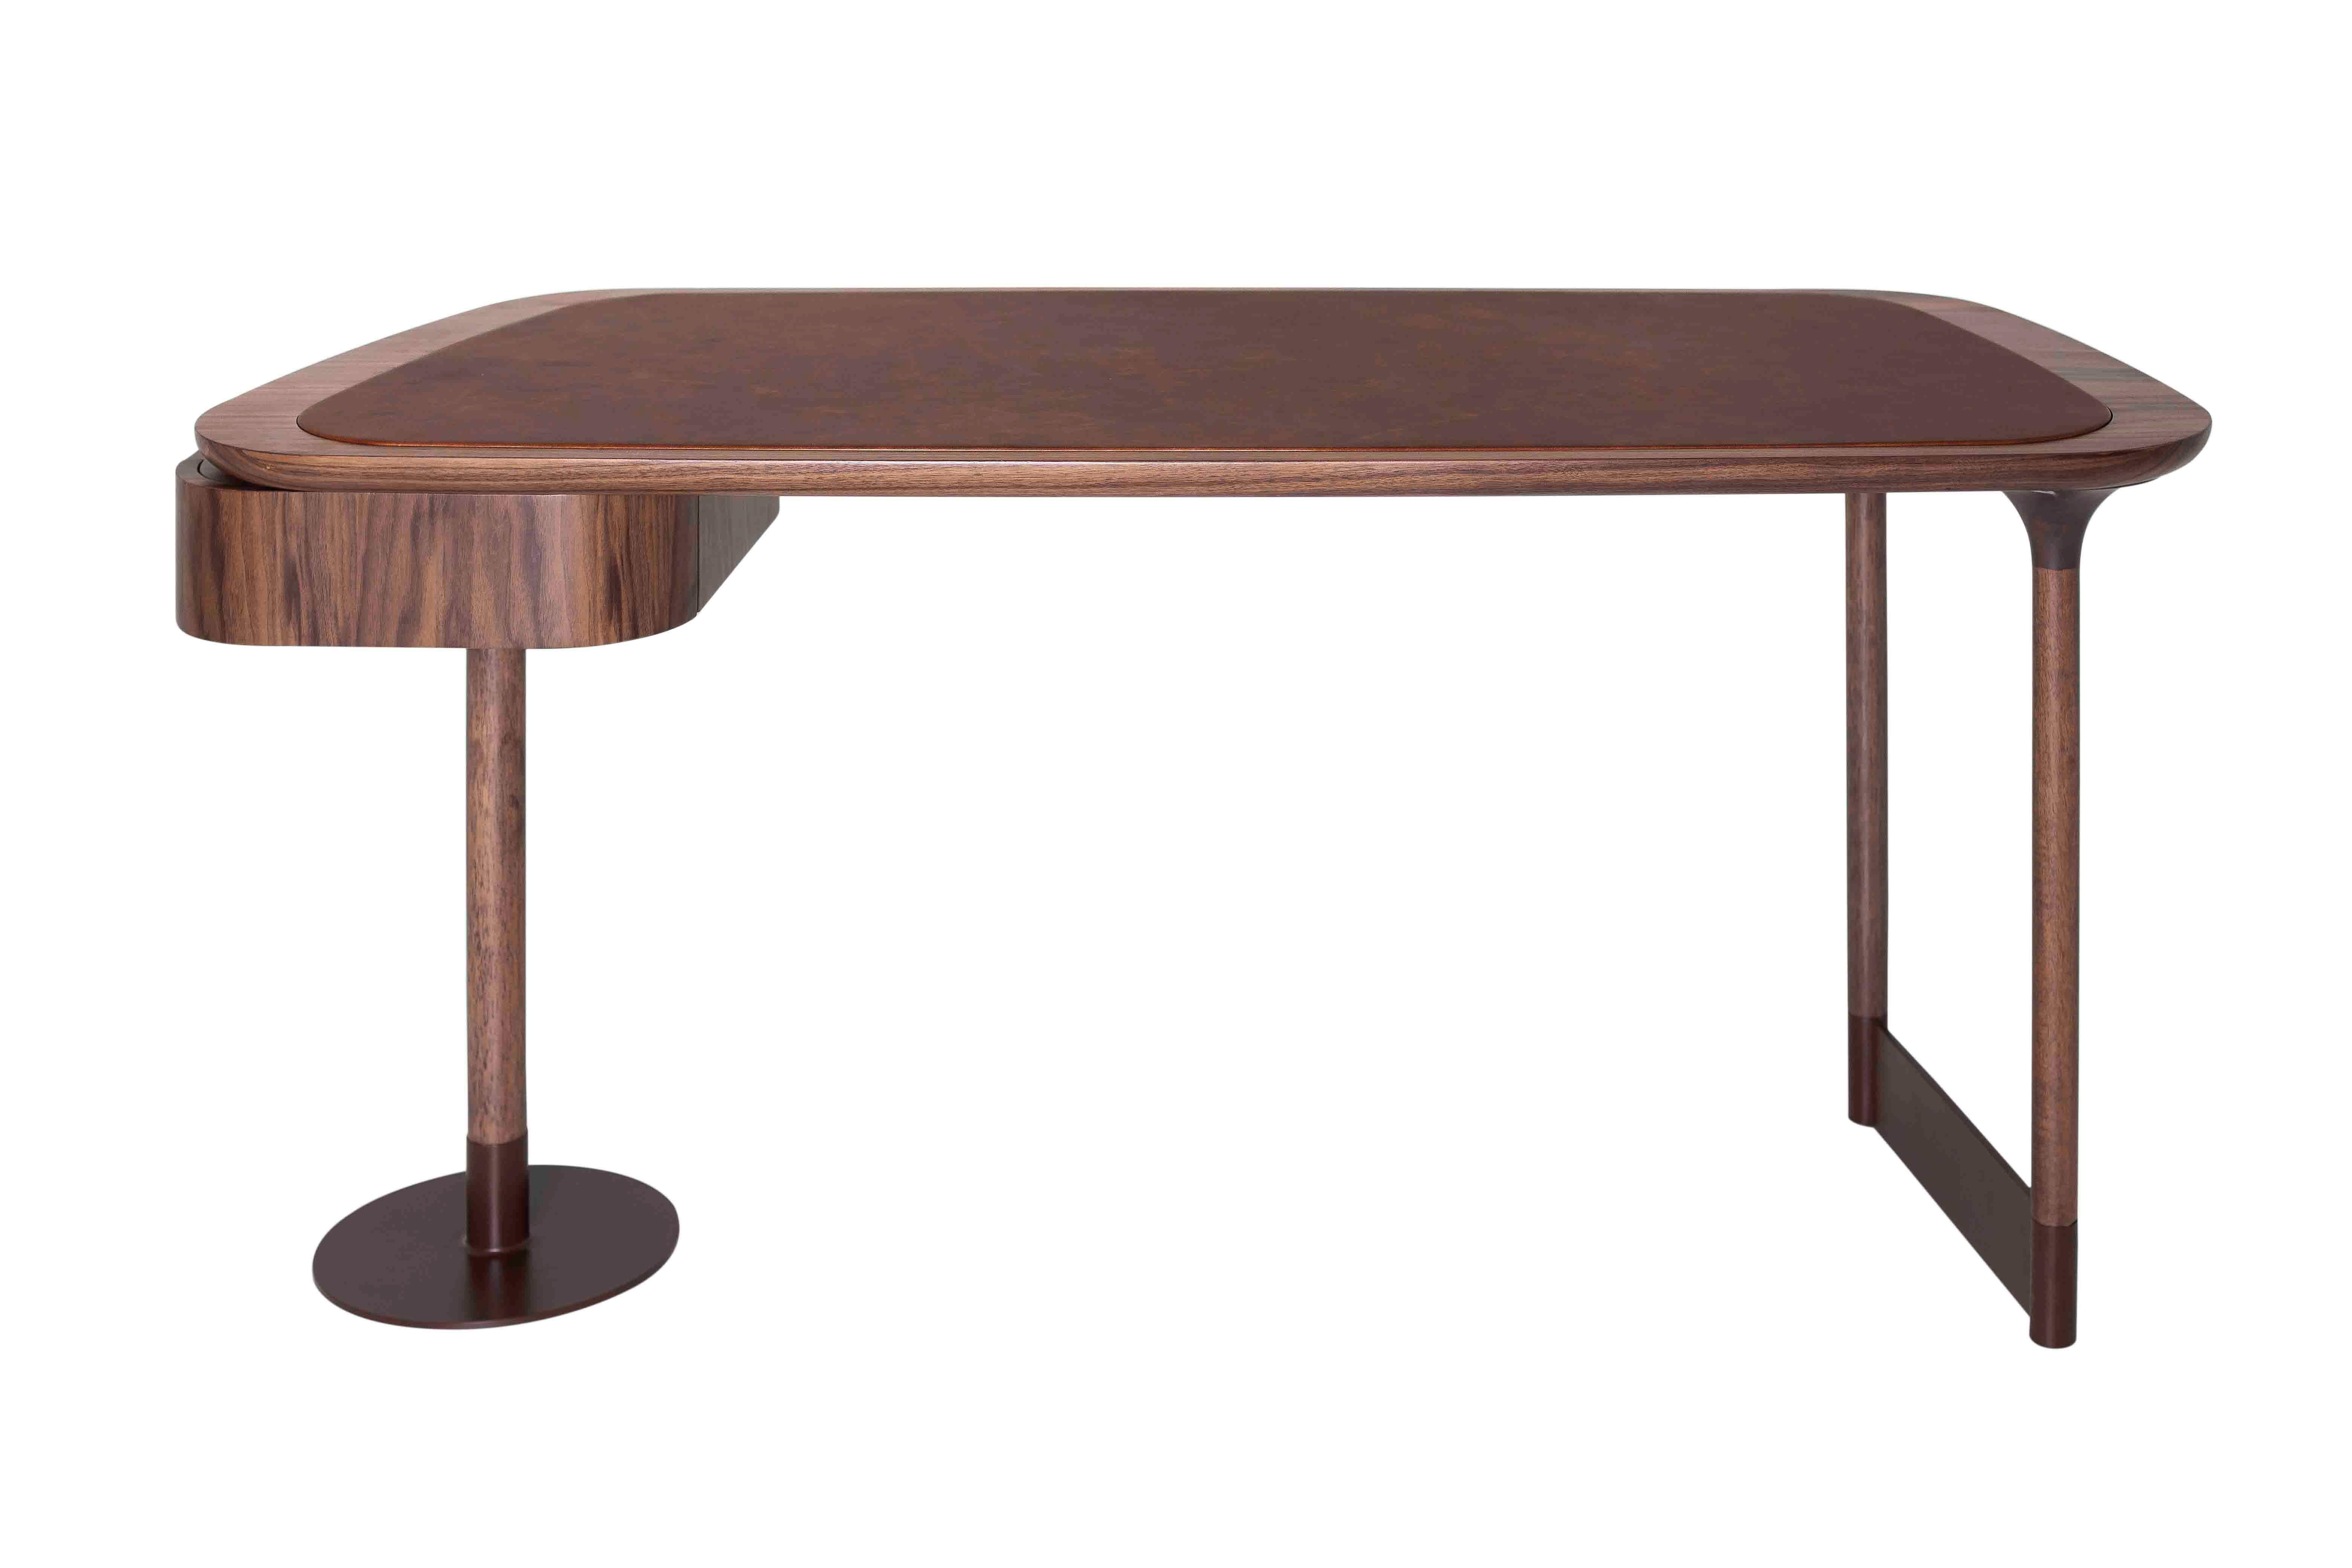 The office desk Ela is a high-end piece to add personality to your home office space. Details in carbon steel, top upholstered in leather, and wood drawer.

Finishes can be customized.